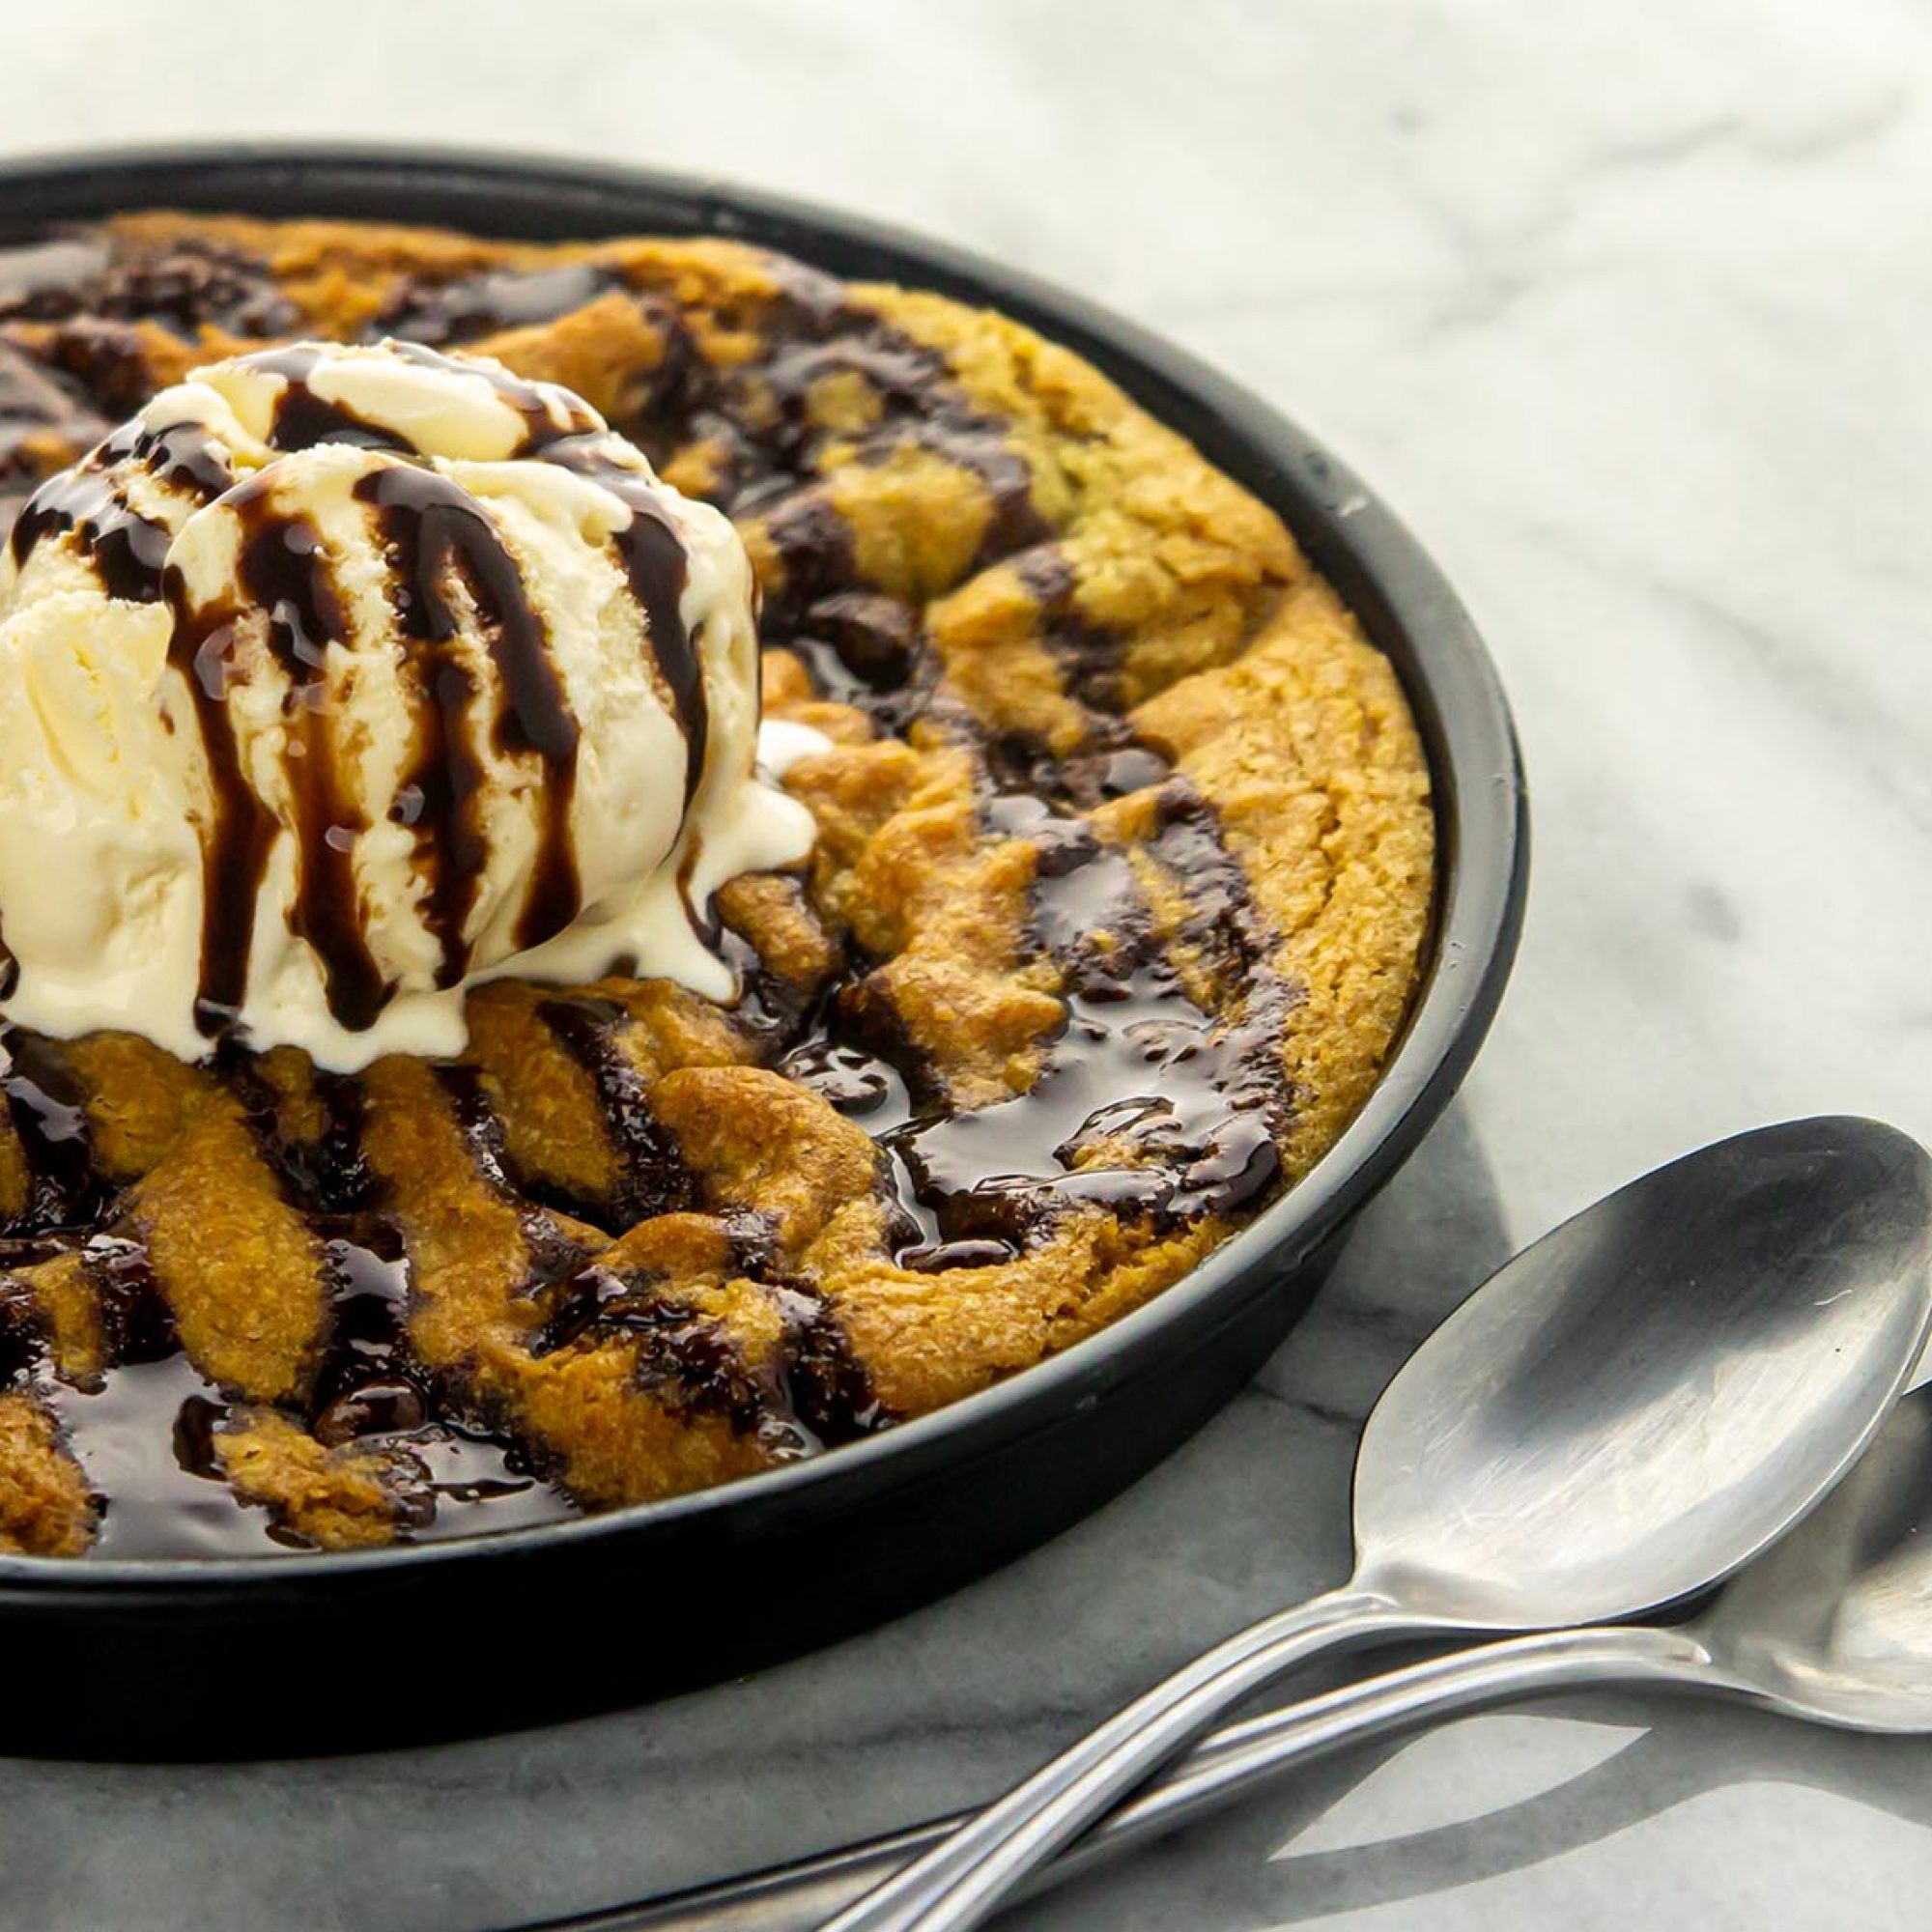 Shareable Air Fryer Chocolate Chip Skillet Cookie